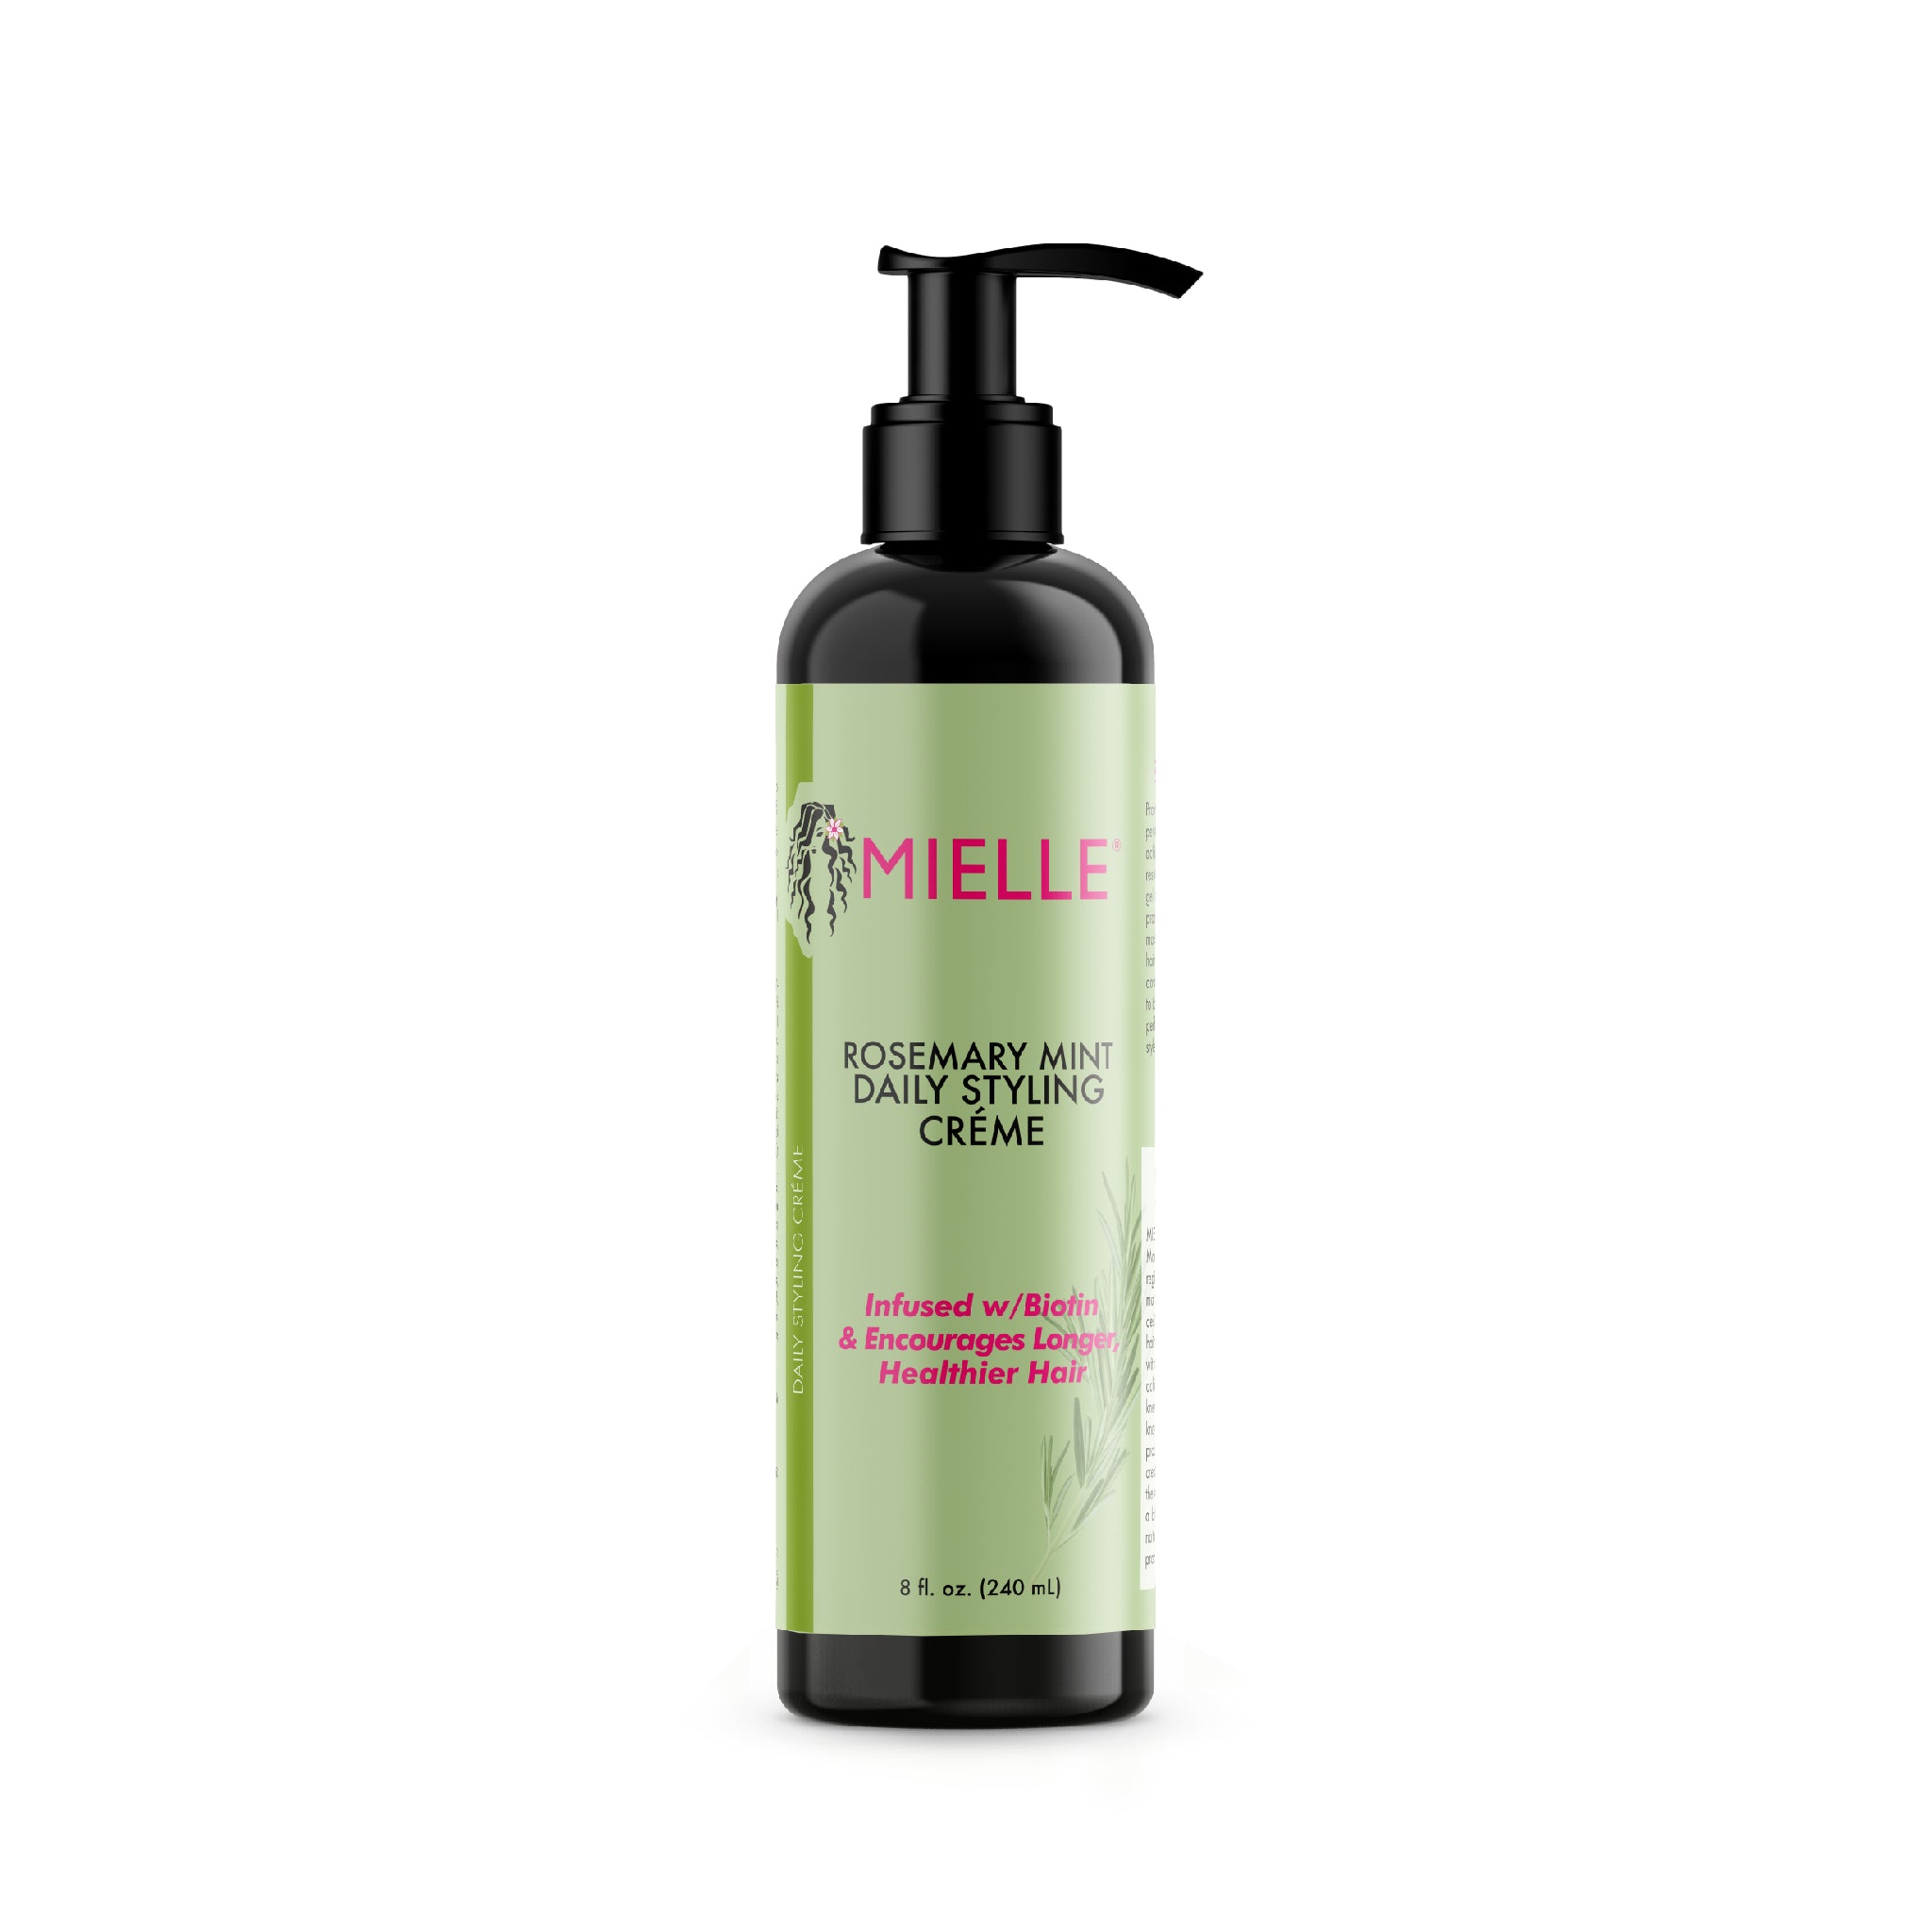 Mielle Rosemary Mint Multi-Vitamin Daily Styling Creme